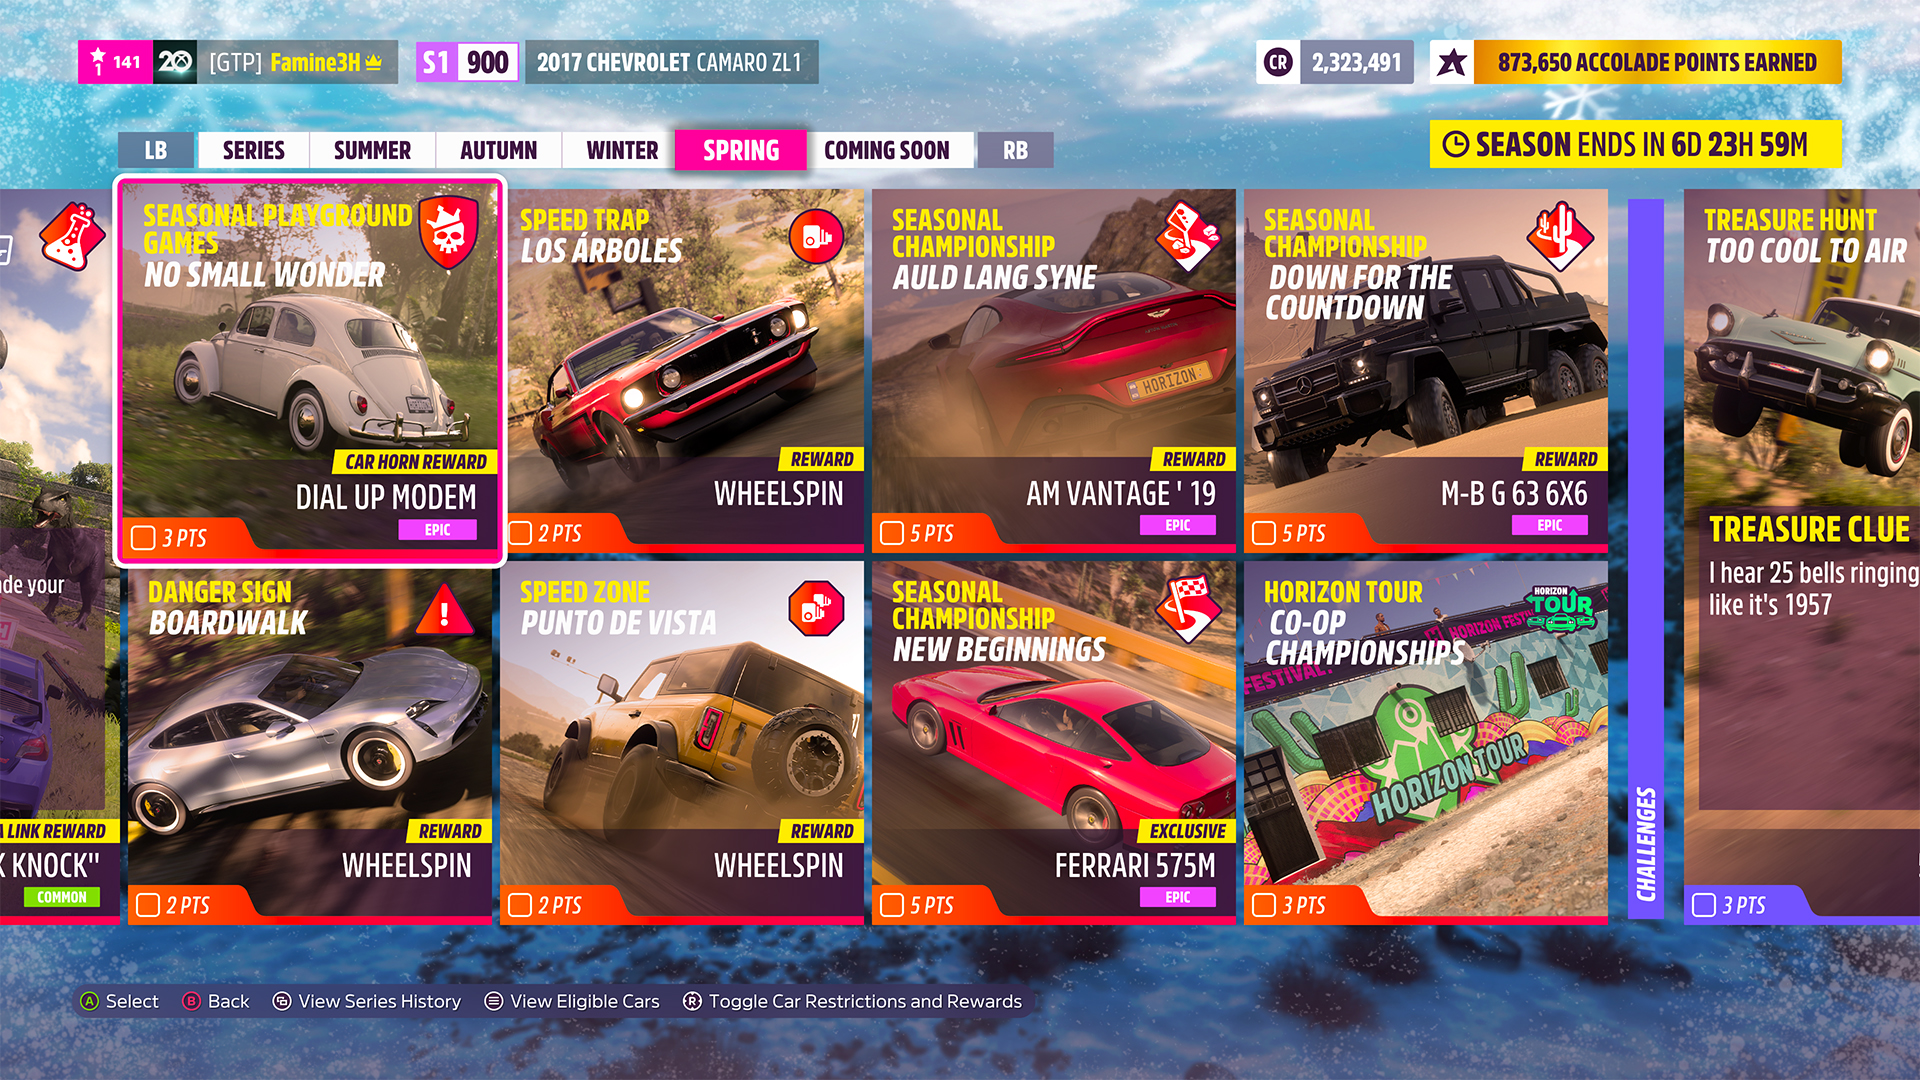 Forza Horizon 5 getting a trunkload of content in Series 6 update